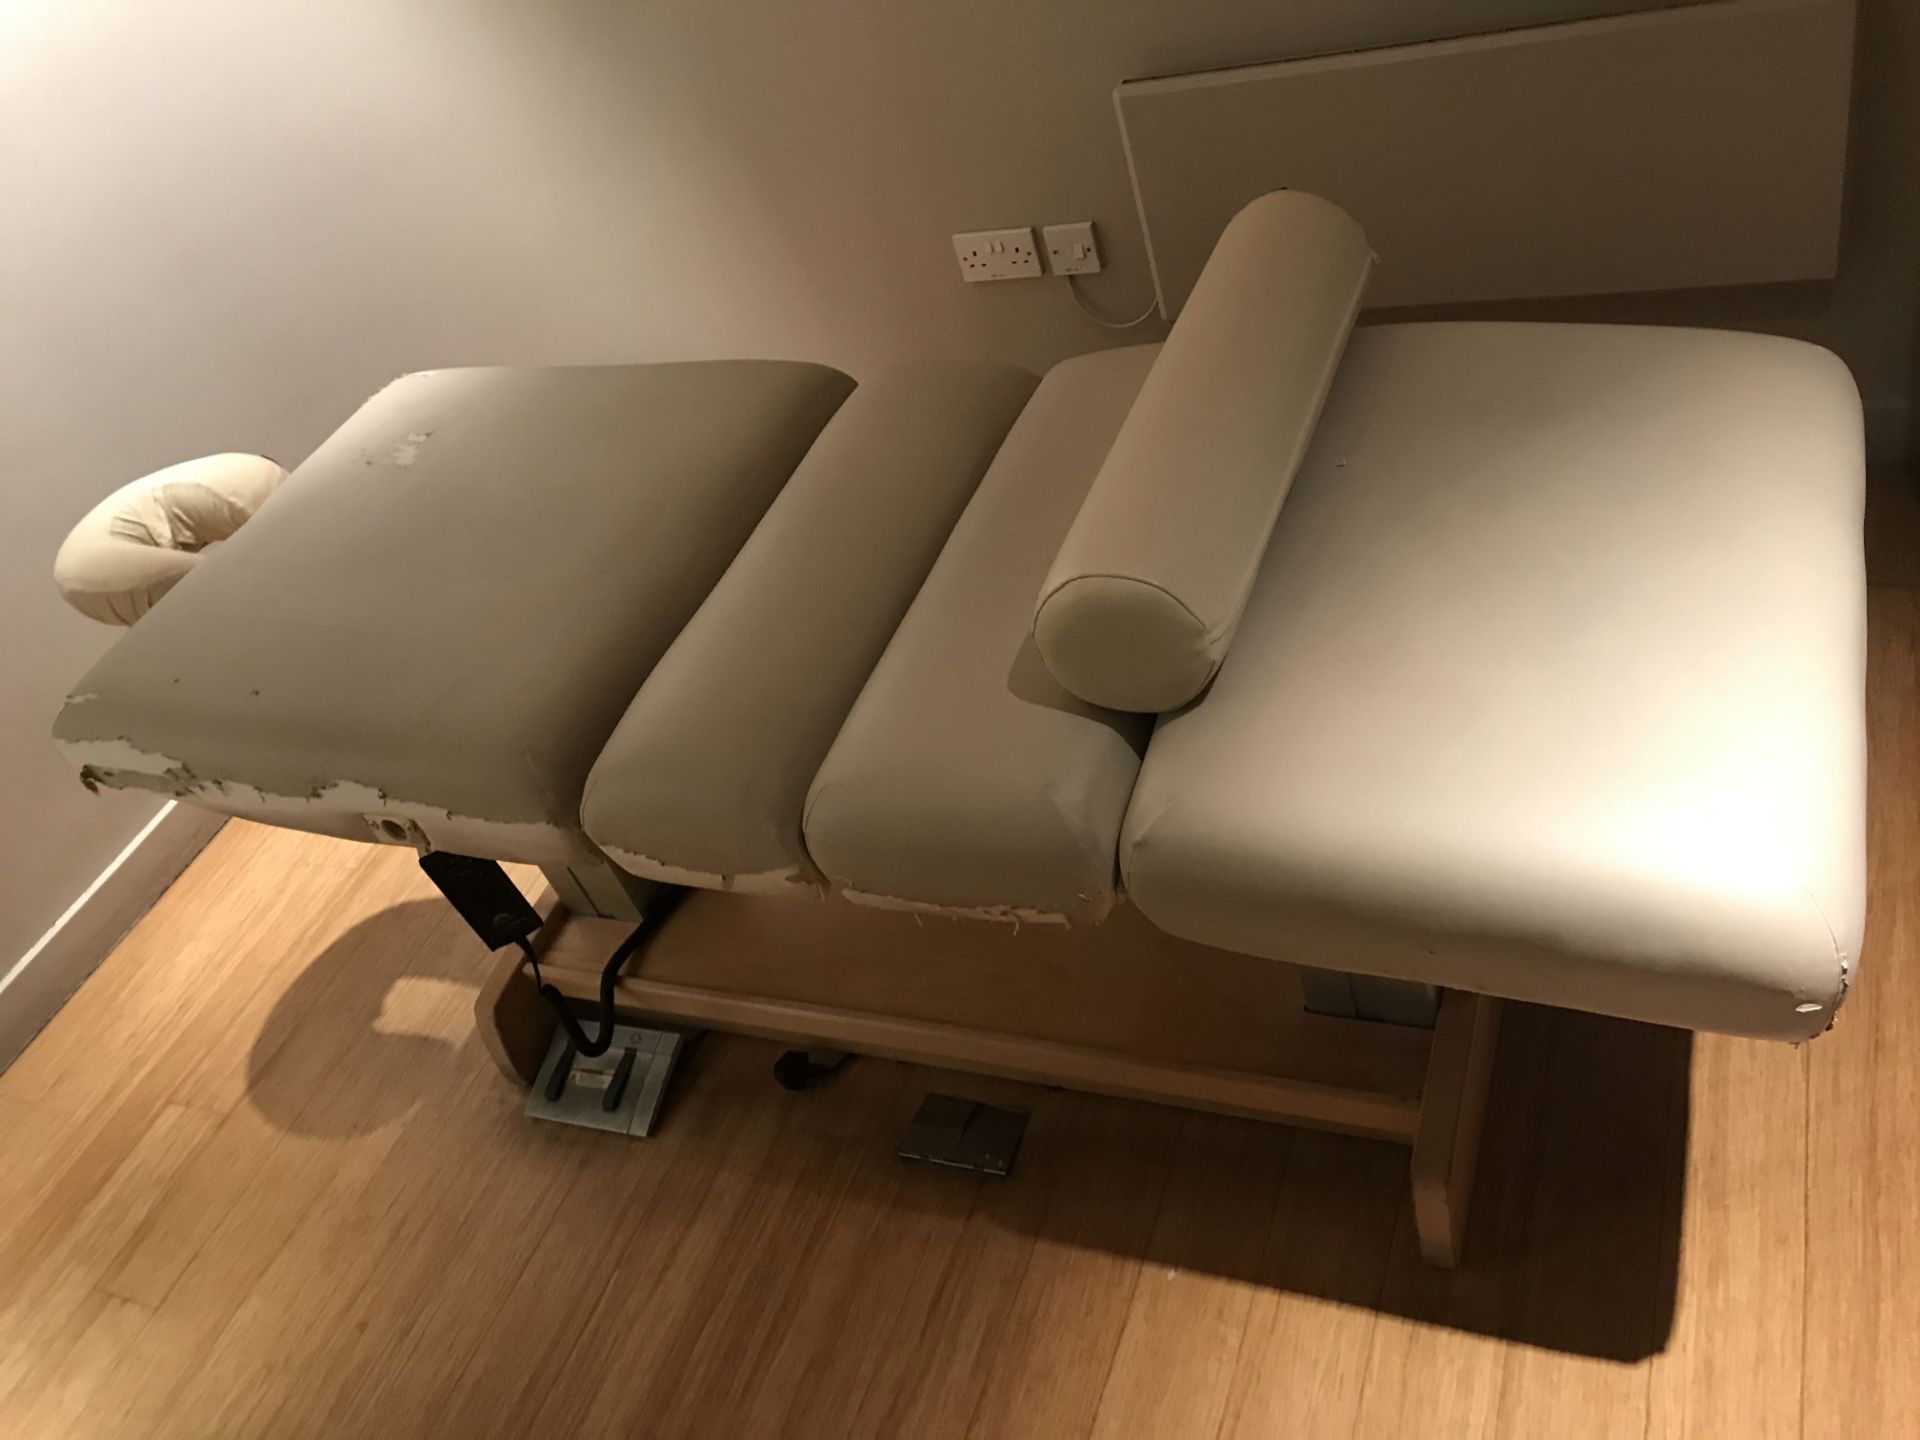 1 x Oakworks Clinician Electric-Hydraulic Massage Table With Footpedal and Linak HBWO Remote Control - Image 7 of 11